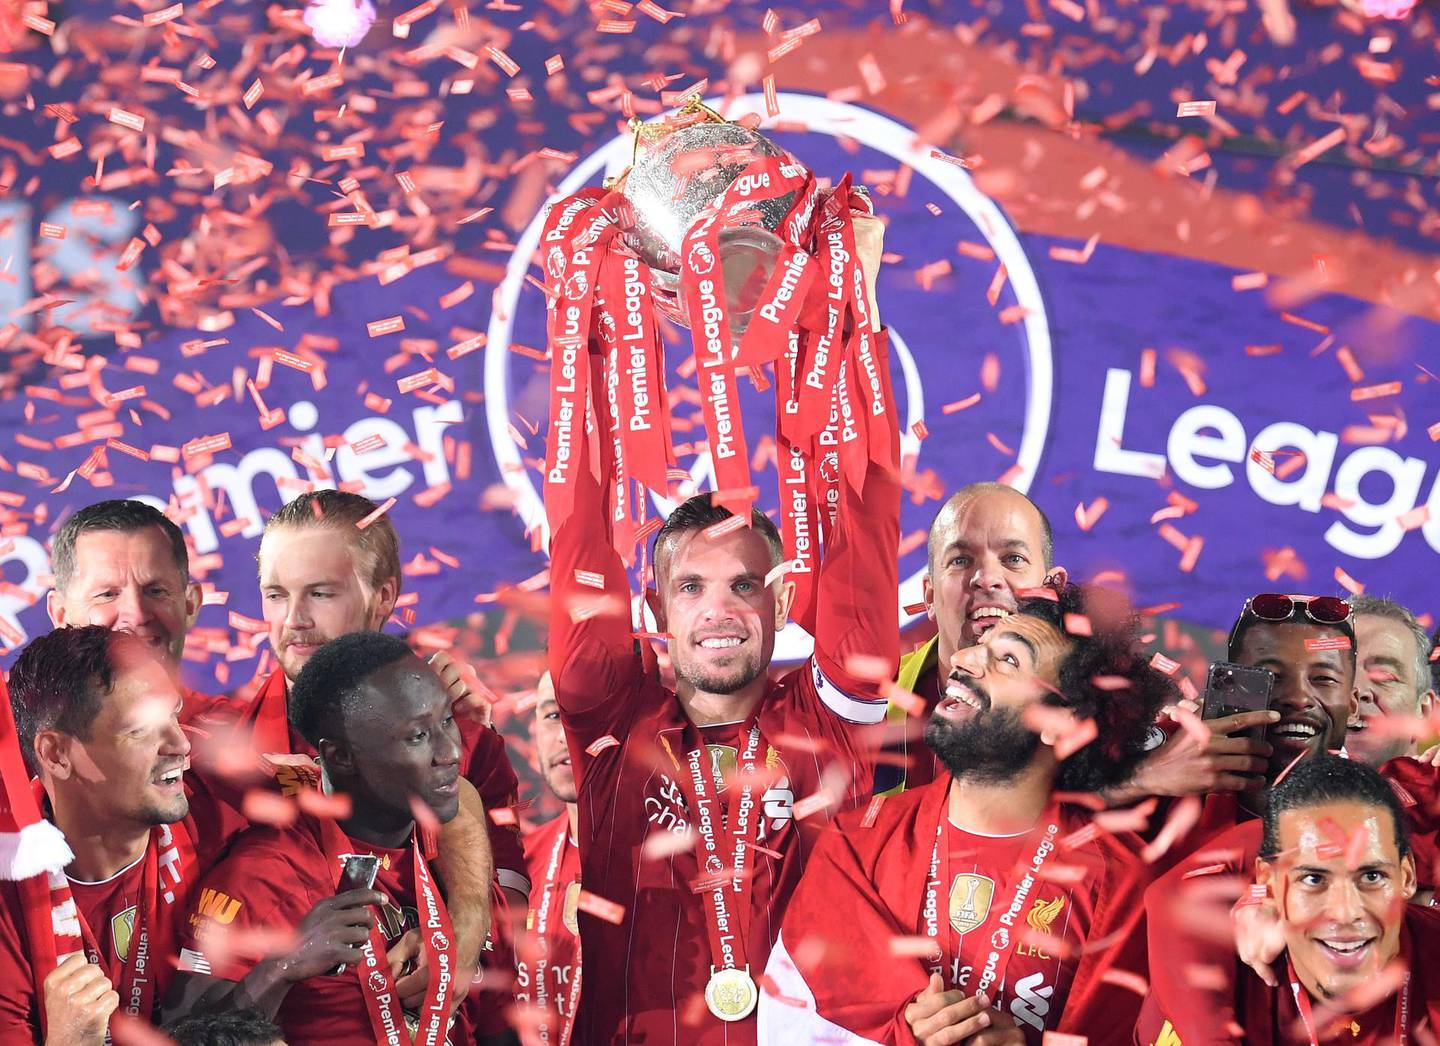 LIVERPOOL, ENGLAND - JULY 22: Jordan Henderson of Liverpool holds the Premier League Trophy aloft along side Mohamed Salah as they celebrate winning the League during the presentation ceremony of  the Premier League match between Liverpool FC and Chelsea FC at Anfield on July 22, 2020 in Liverpool, England. Football Stadiums around Europe remain empty due to the Coronavirus Pandemic as Government social distancing laws prohibit fans inside venues resulting in games being played behind closed doors. (Photo by Laurence Griffiths/Getty Images)